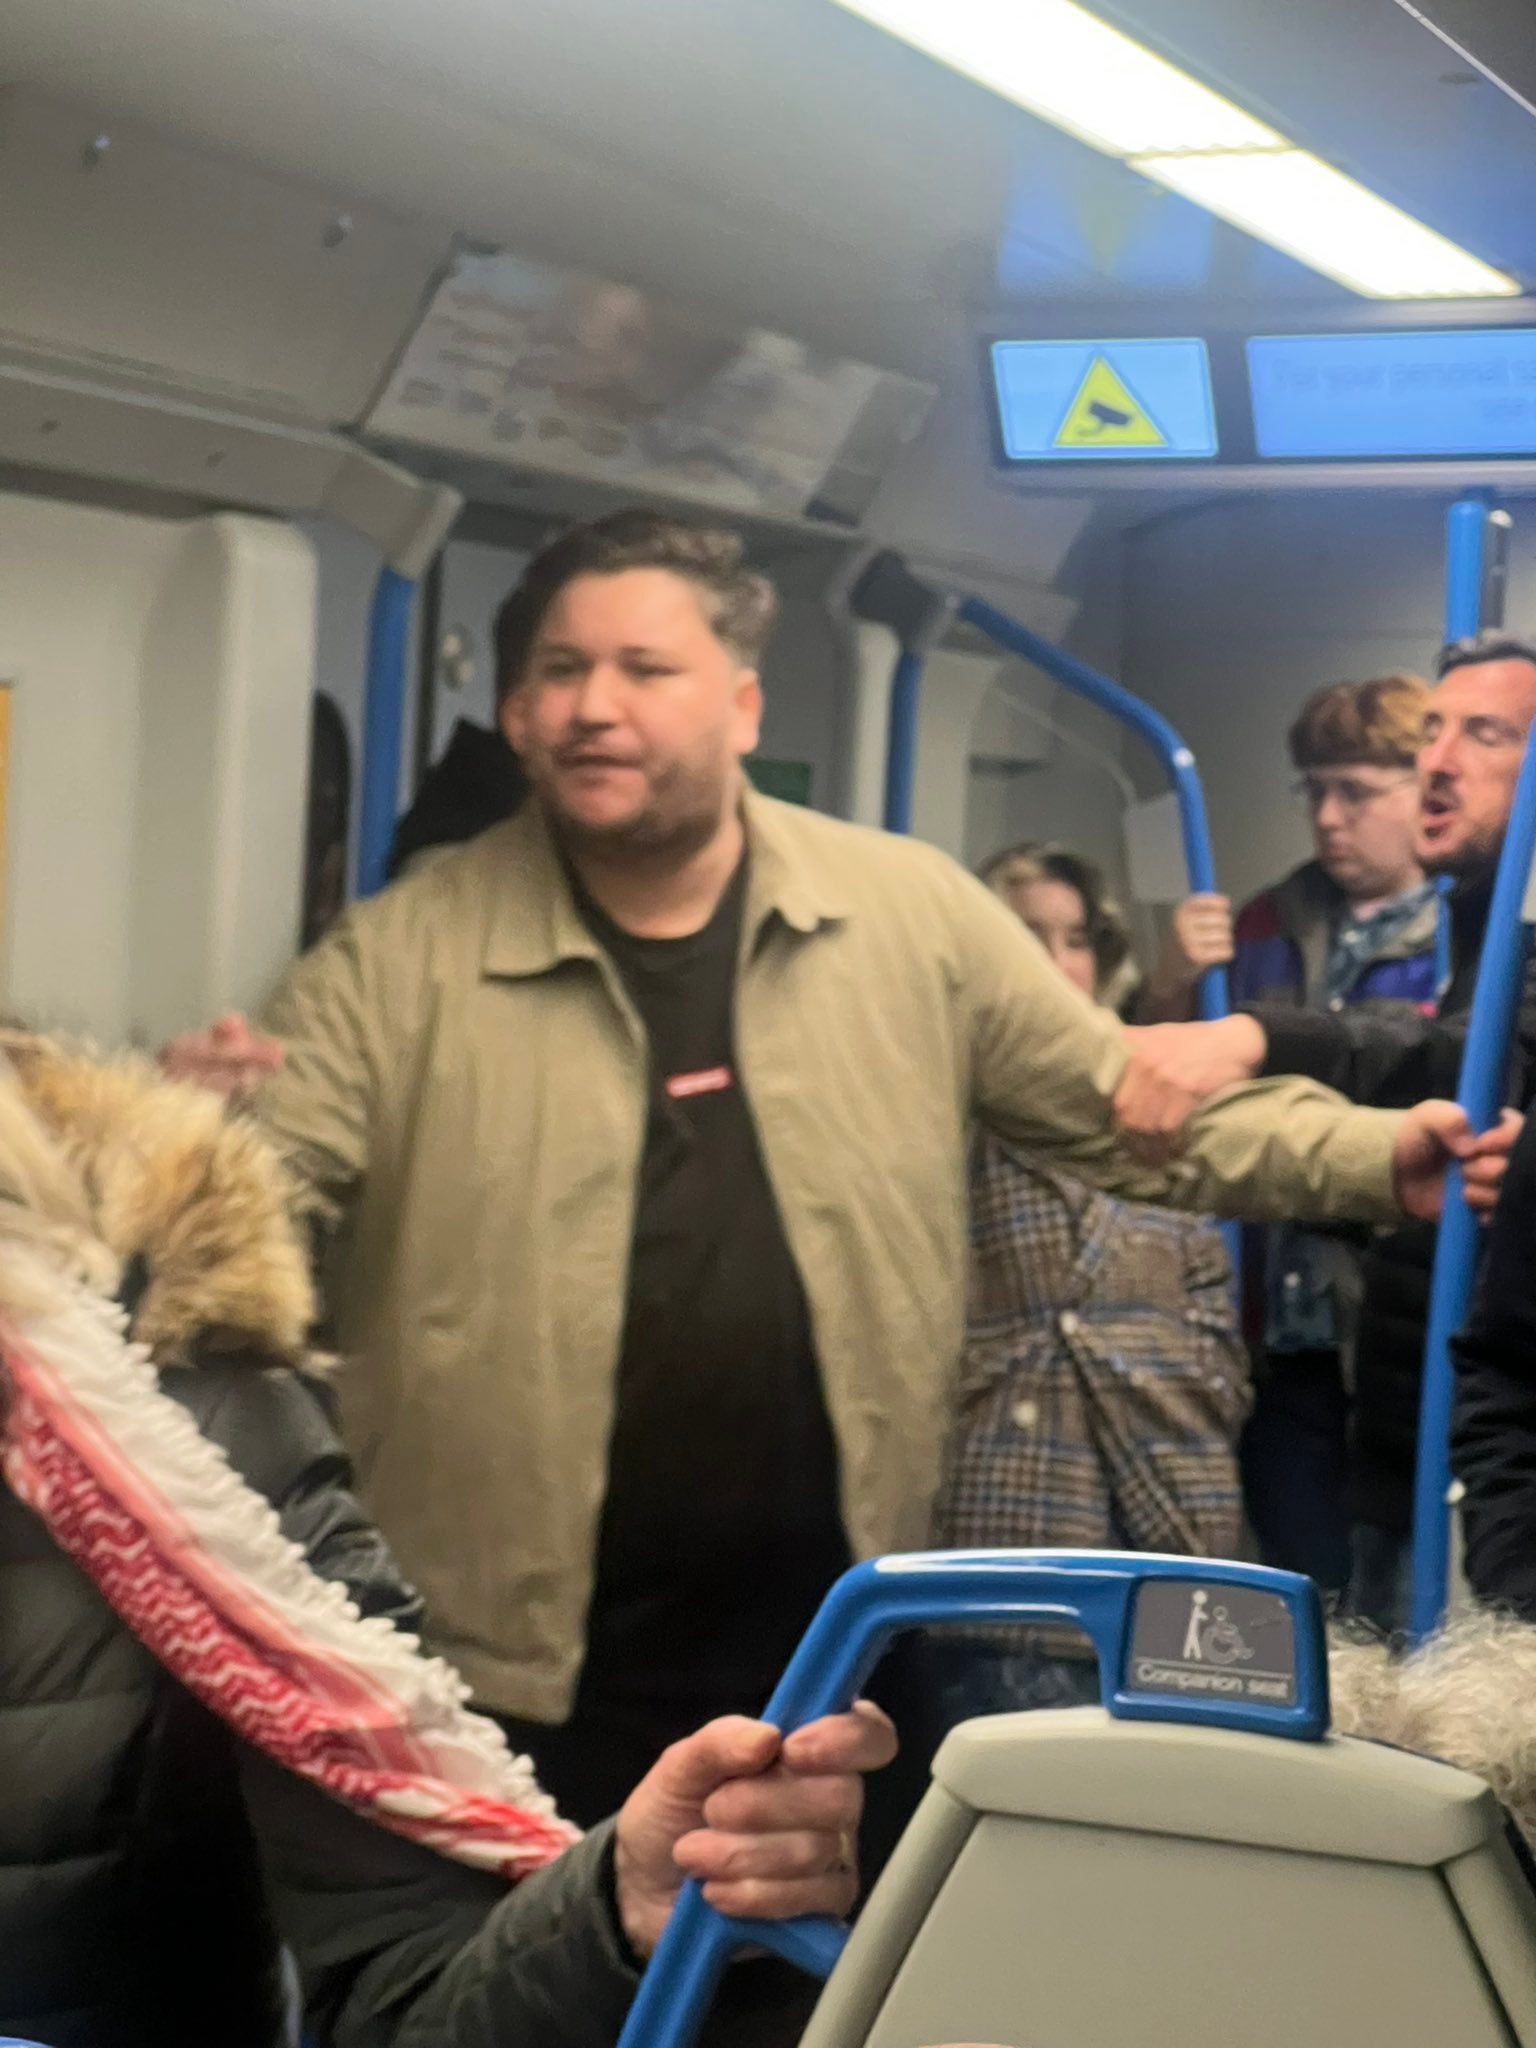 Passengers filmed the incident on the London service